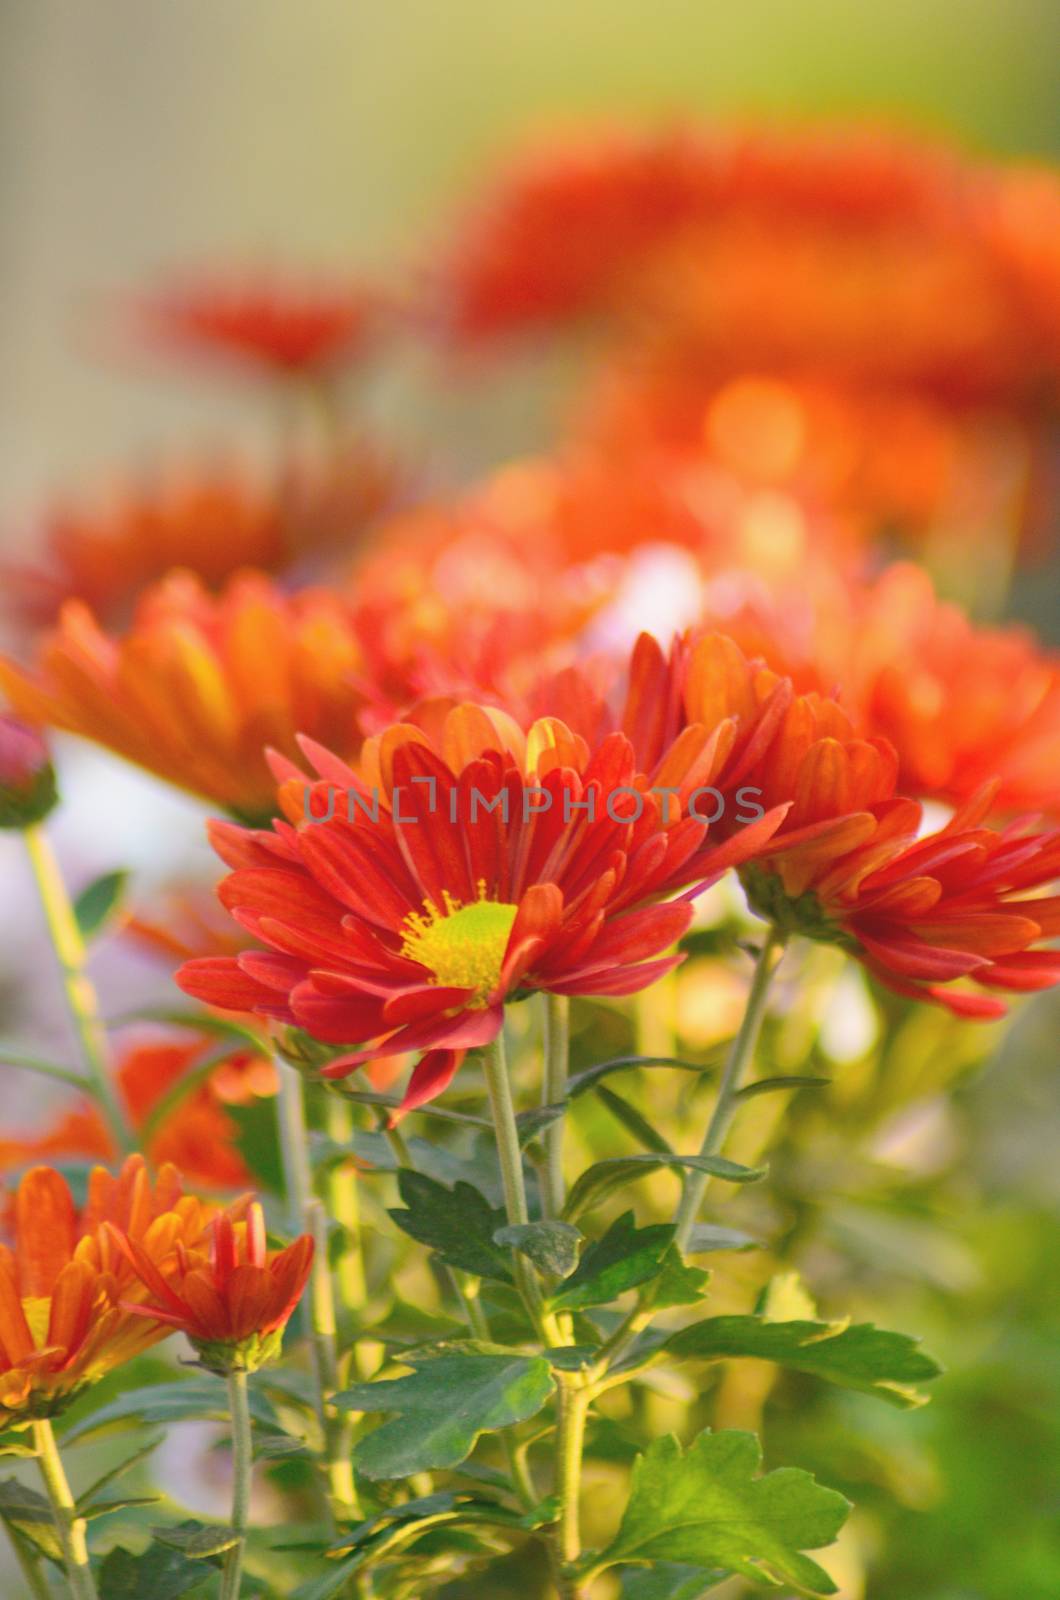 Flowers of chrysanthemum of the Aster family by moviephoto